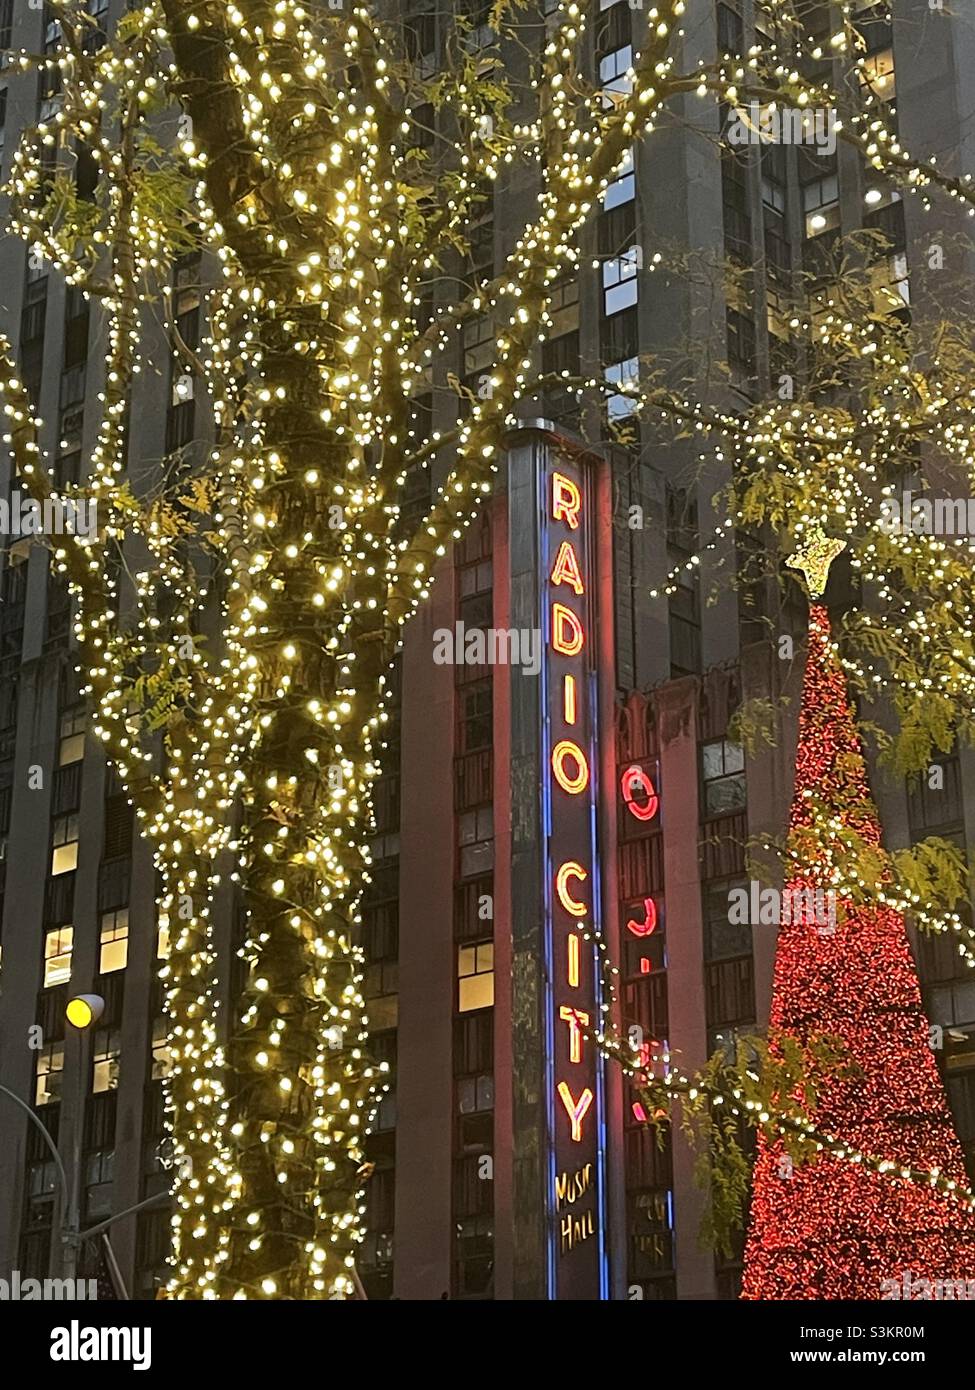 Radio city music Hall is brightly lit during the holiday season in Midtown Manhattan, Rockefeller center, 2021, United States, New York City Stock Photo